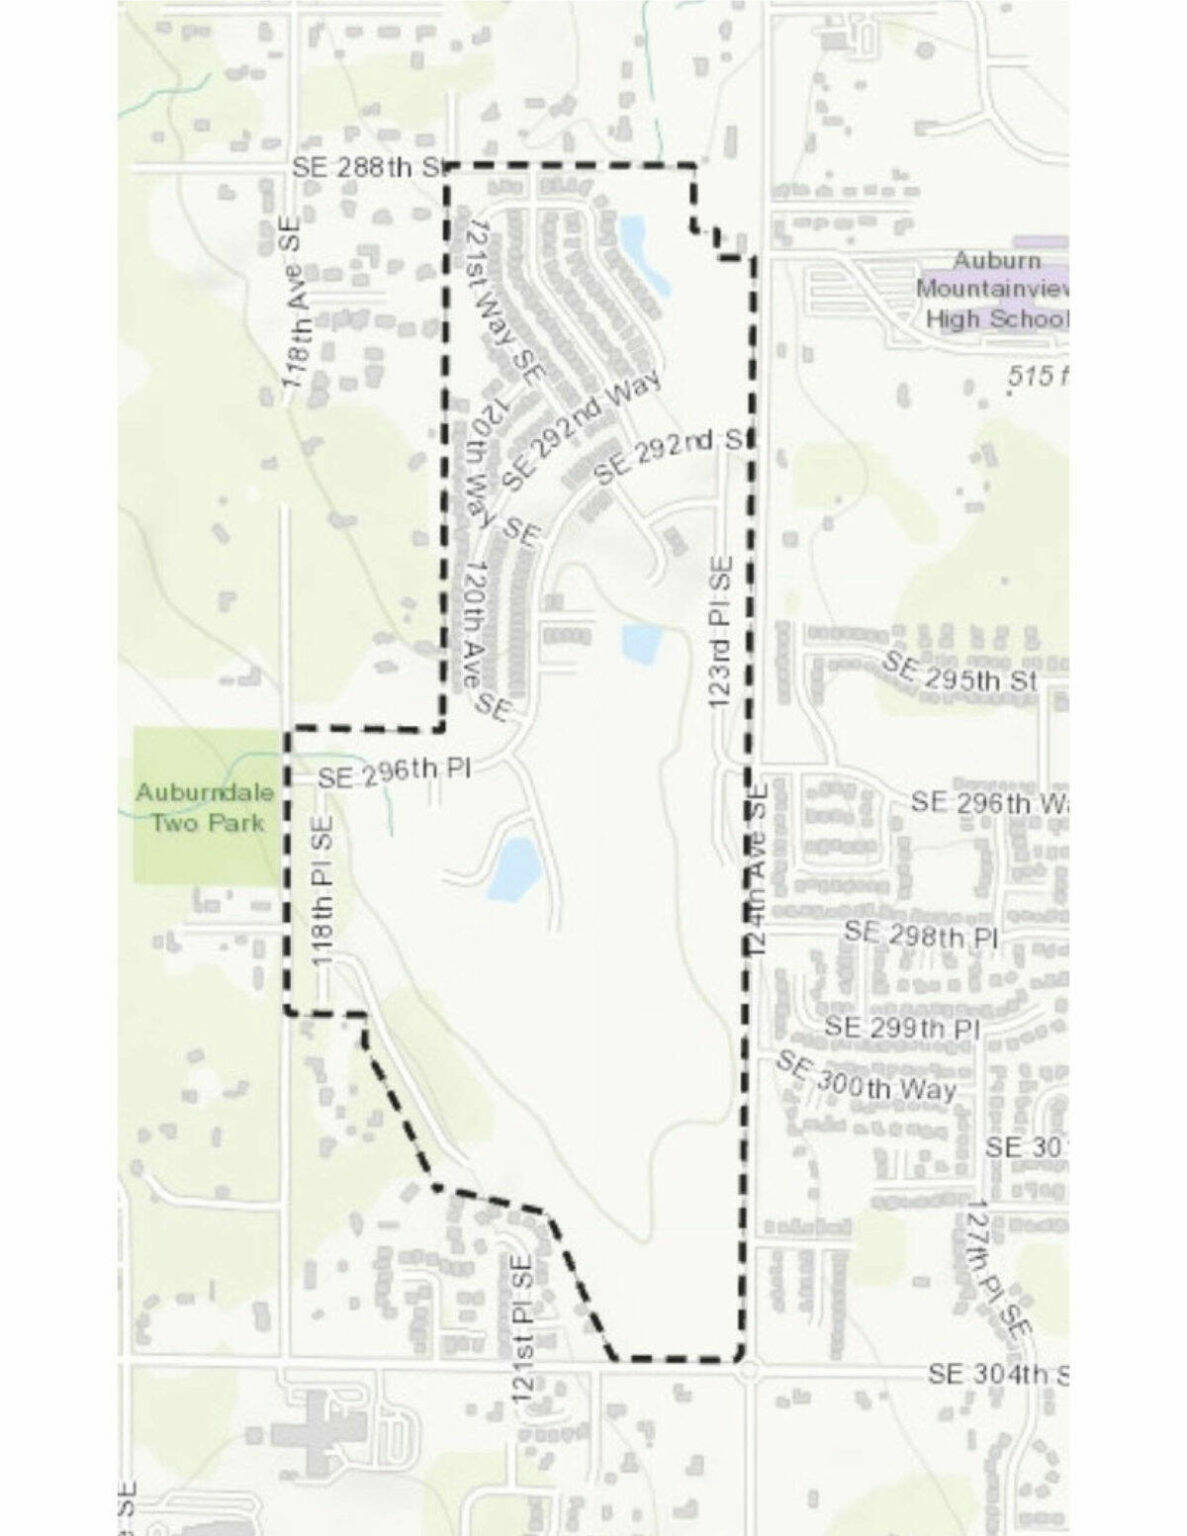 COURTESY GRAPHIC, City of Kent
A map of the Bridges neighborhood in Kent, surrounded by property owned by the city of Auburn.